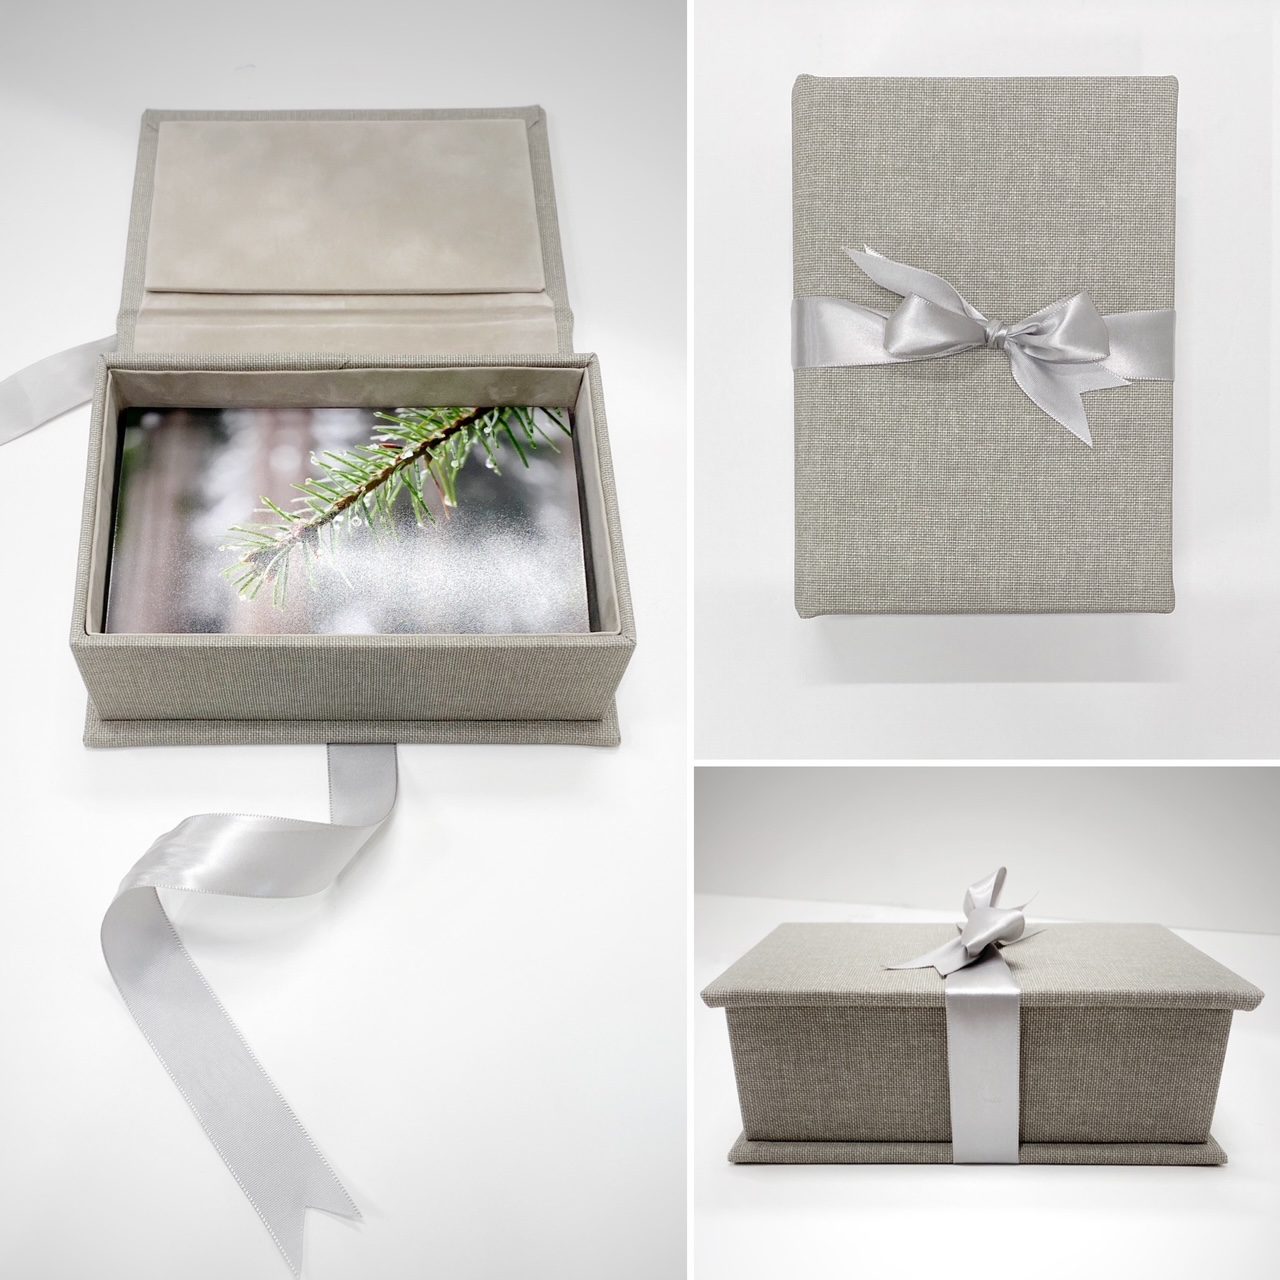 luxury presentation cases by lifethreads albums